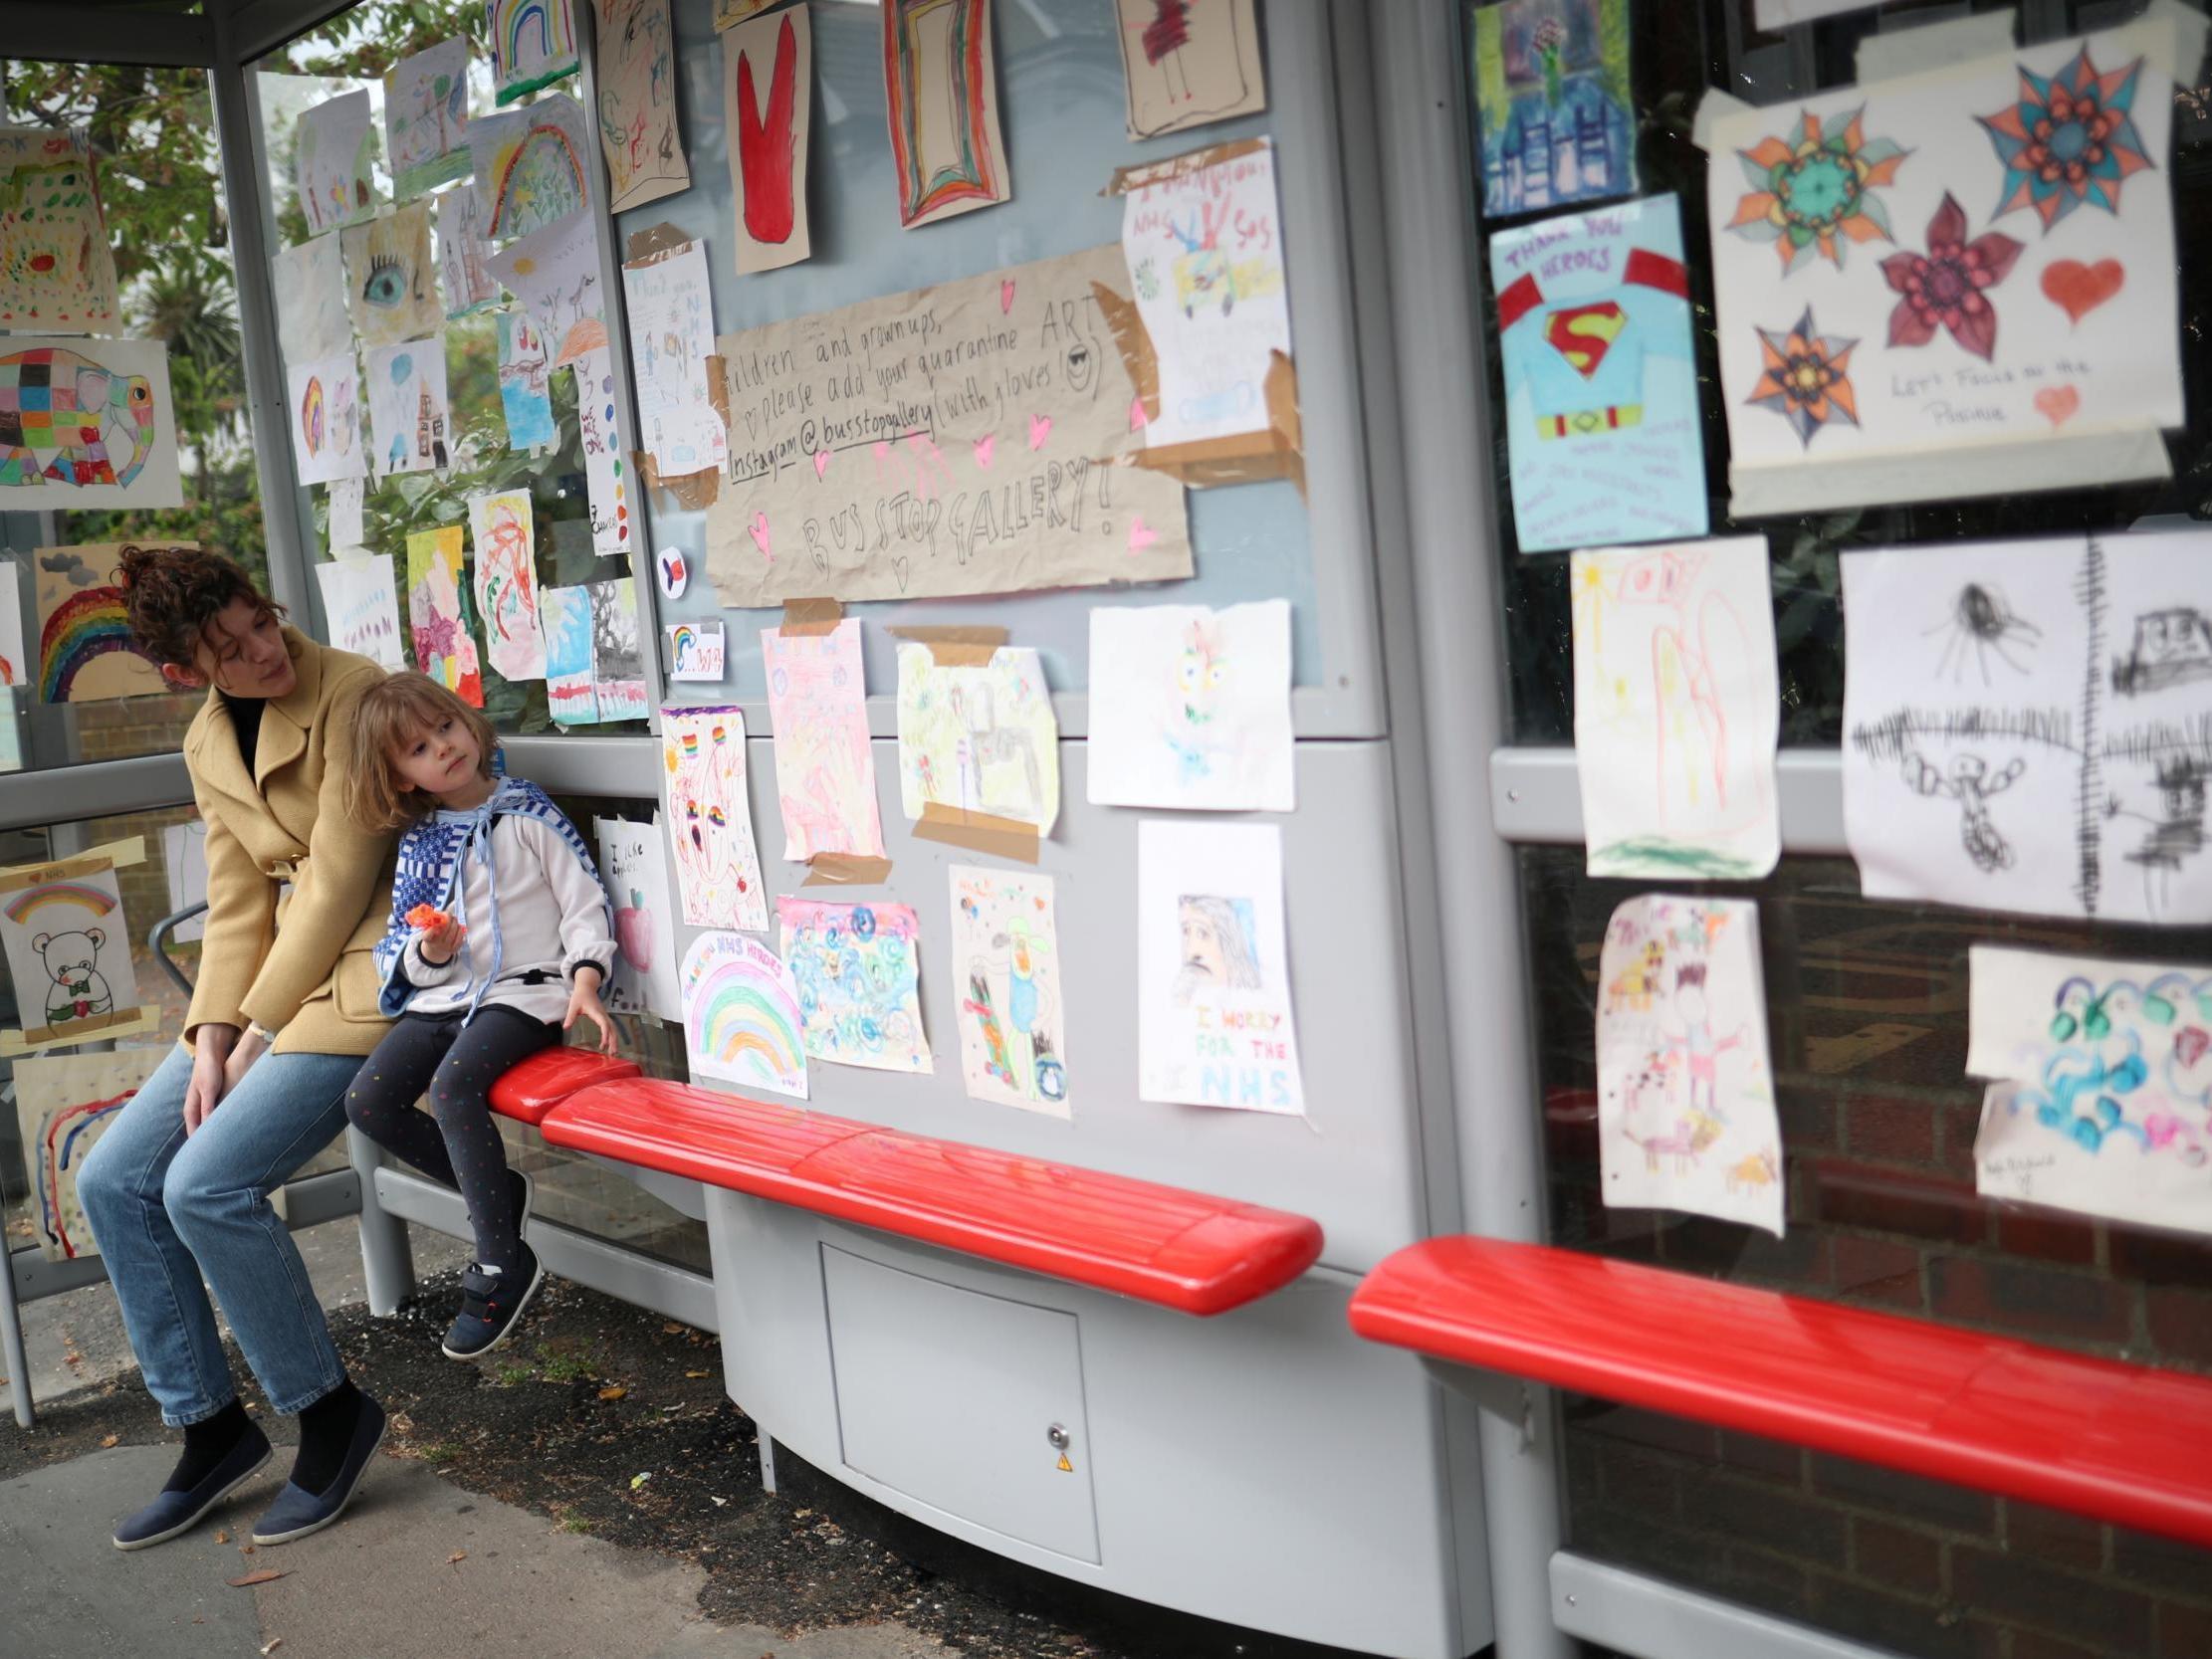 Sarah Lamarr and her four-year-old daughter Rosie at the bus stop gallery (Reuters)